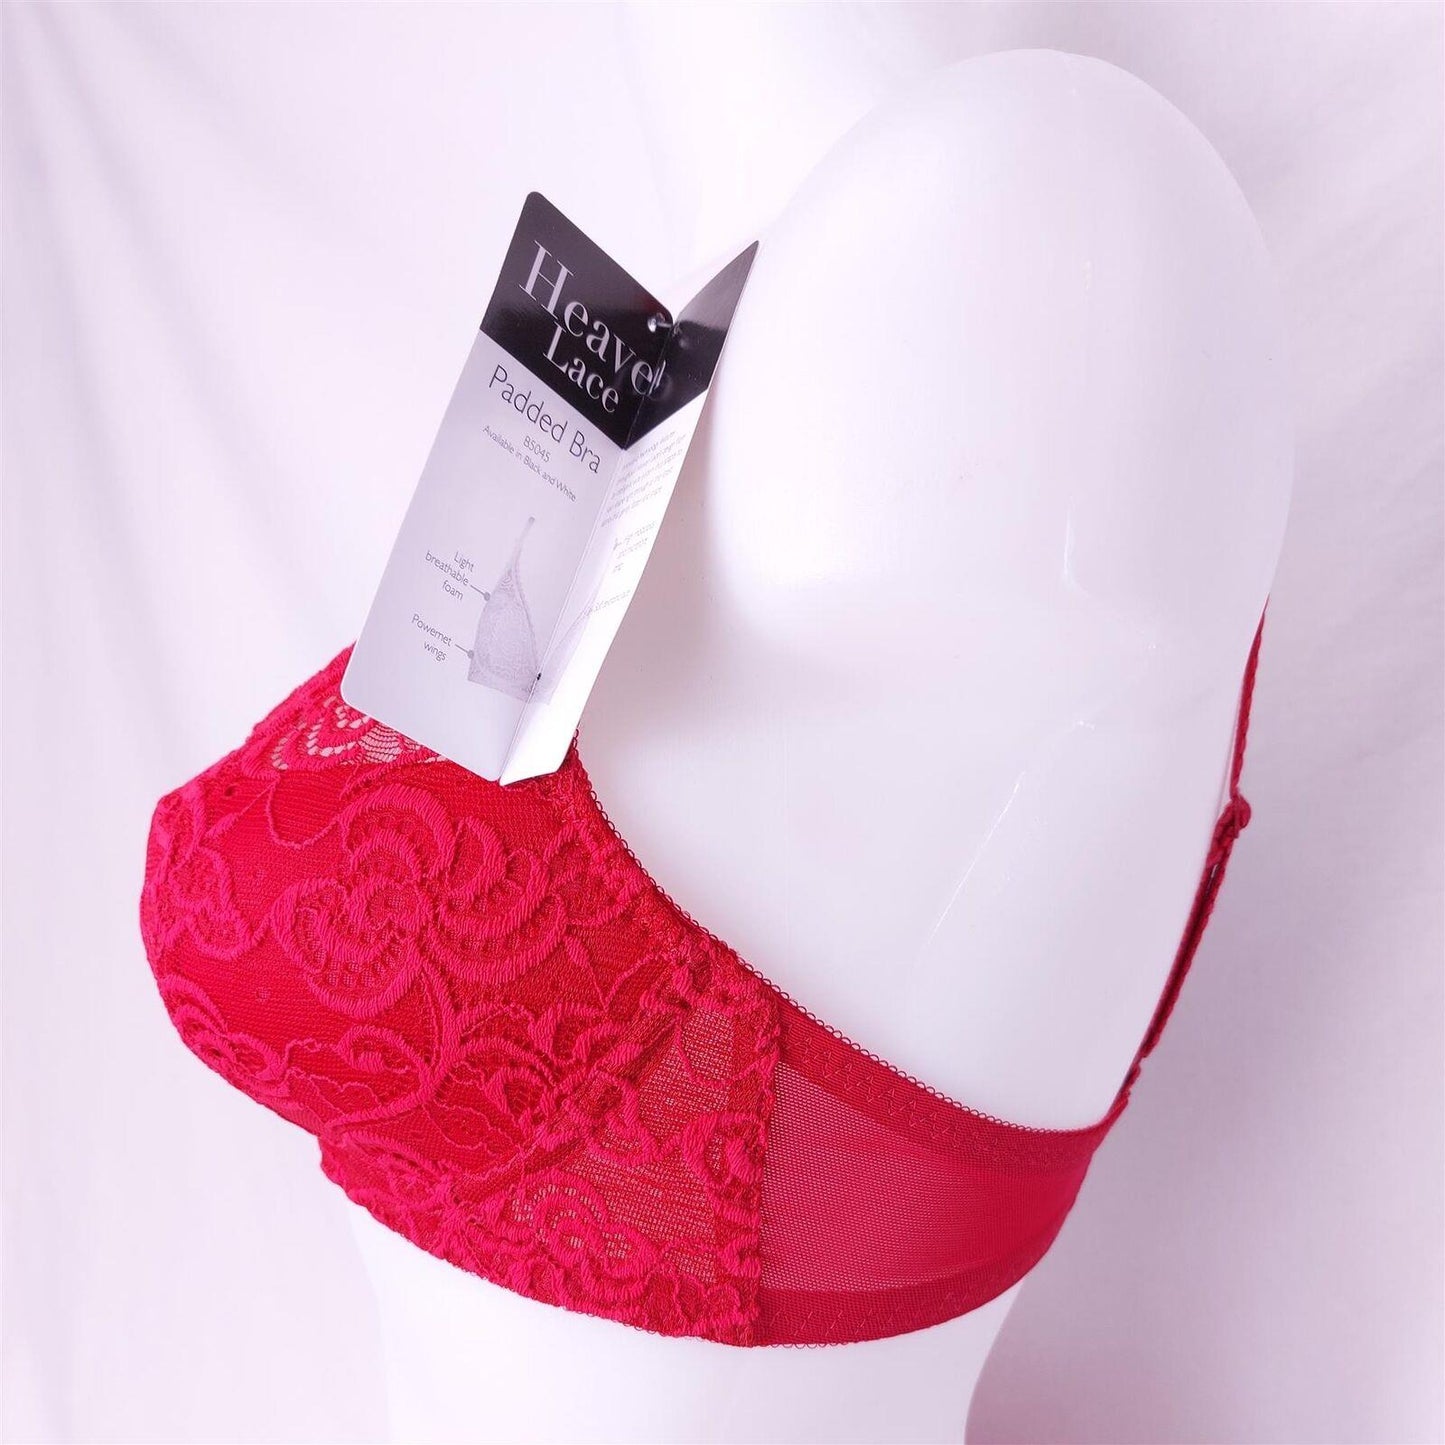 2x Berlei Lace Comfort Bras Underwired Padded Multipack 32B-34D Red or White New